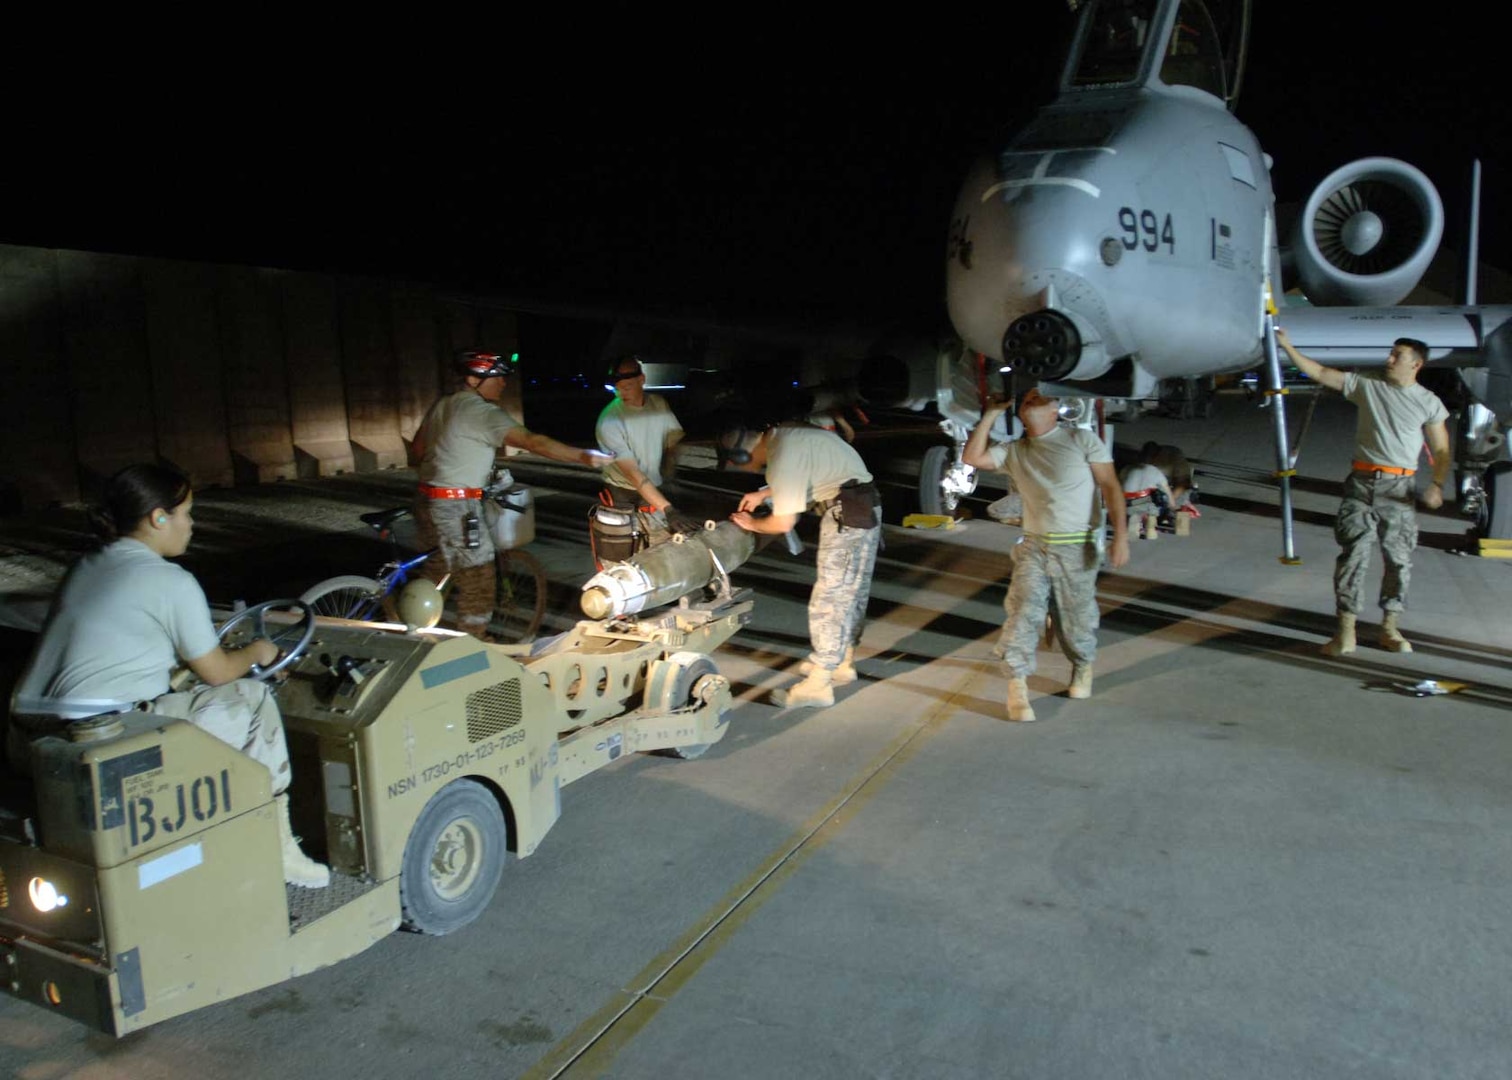 AL ASAD AIR BASE, Iraq -- A 438th Air Expeditionary Group weapons loading team prepares to mount a Joint Direct Attack Munition to an A-10C Thunderbolt II using an MJ-1 â€œjammerâ€ vehicle here. The Airmen made history in Iraq when their upgraded A-10s successfully employed JDAMs in combat. Because the weapon is guided to targets by pinpoint GPS coordinates, experts here say it is 100 percent more accurate than munitions previously employed on the A-10C Thunderbolt II, dramatically improving precision and reducing fratricide. The Airmen are deployed from the 175th Wing, Maryland Air National Guard, located in Baltimore, Md.